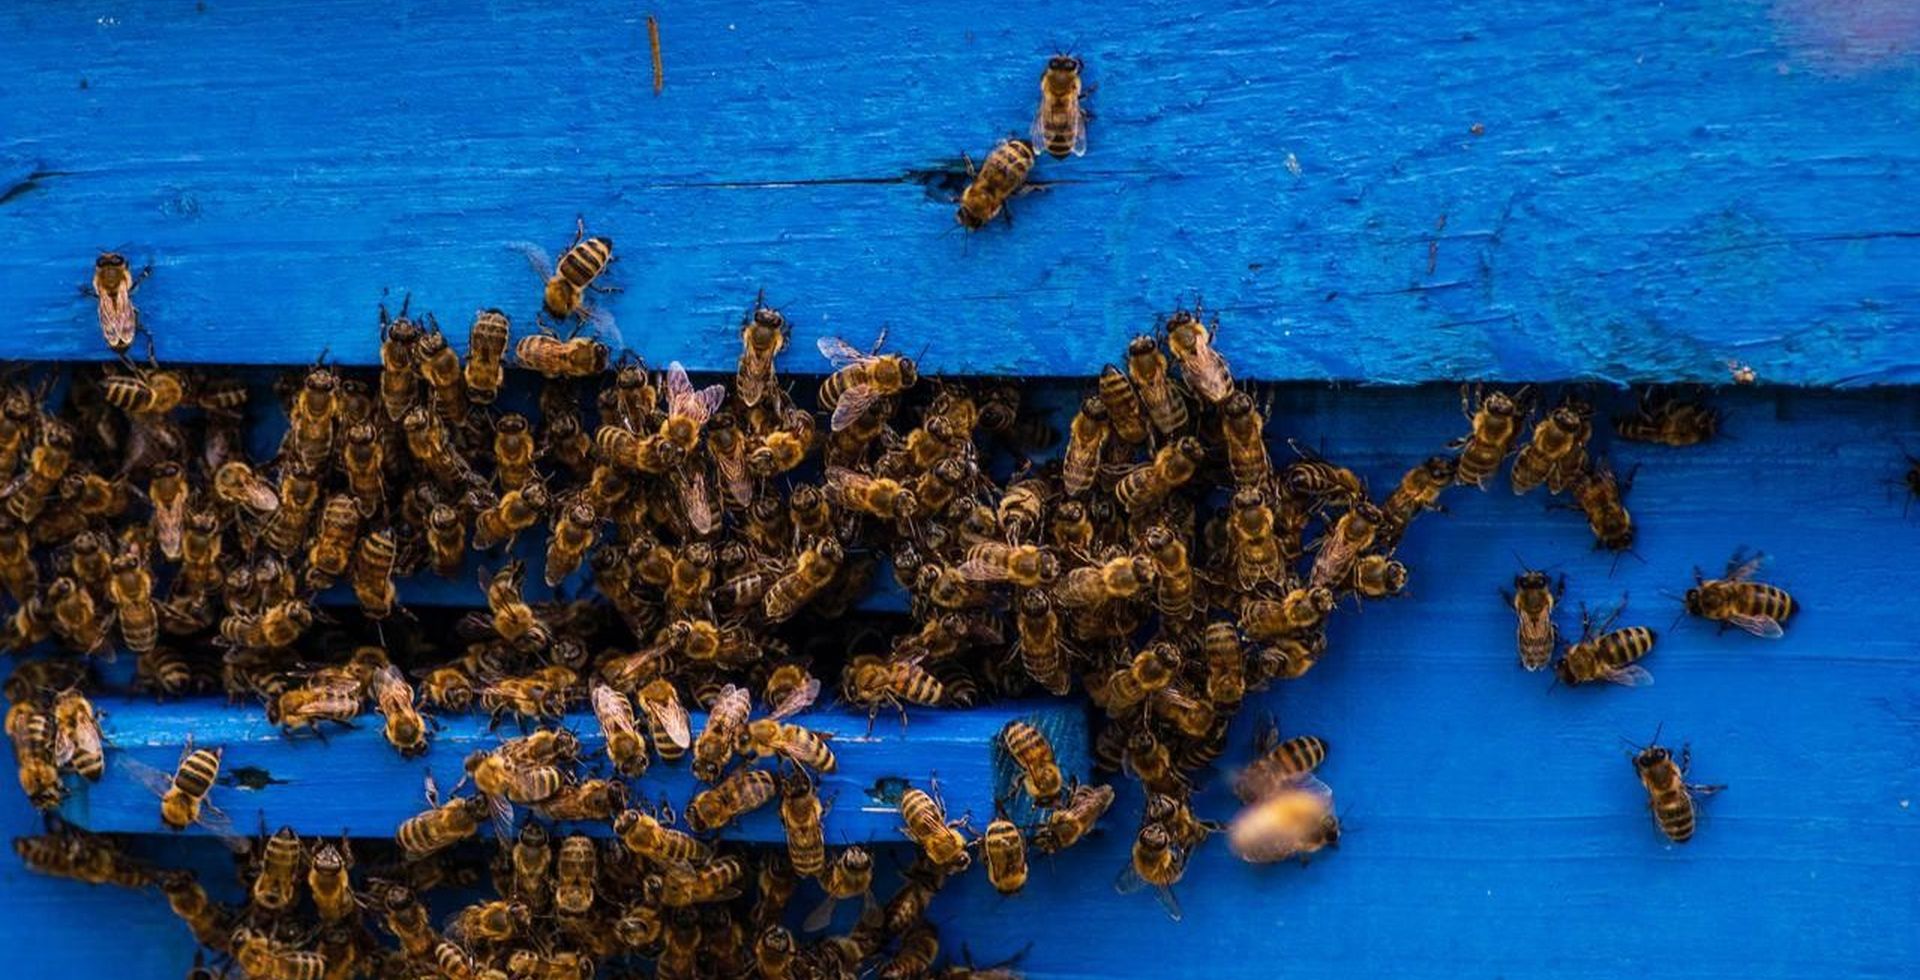 Image of bees swarming around a hive